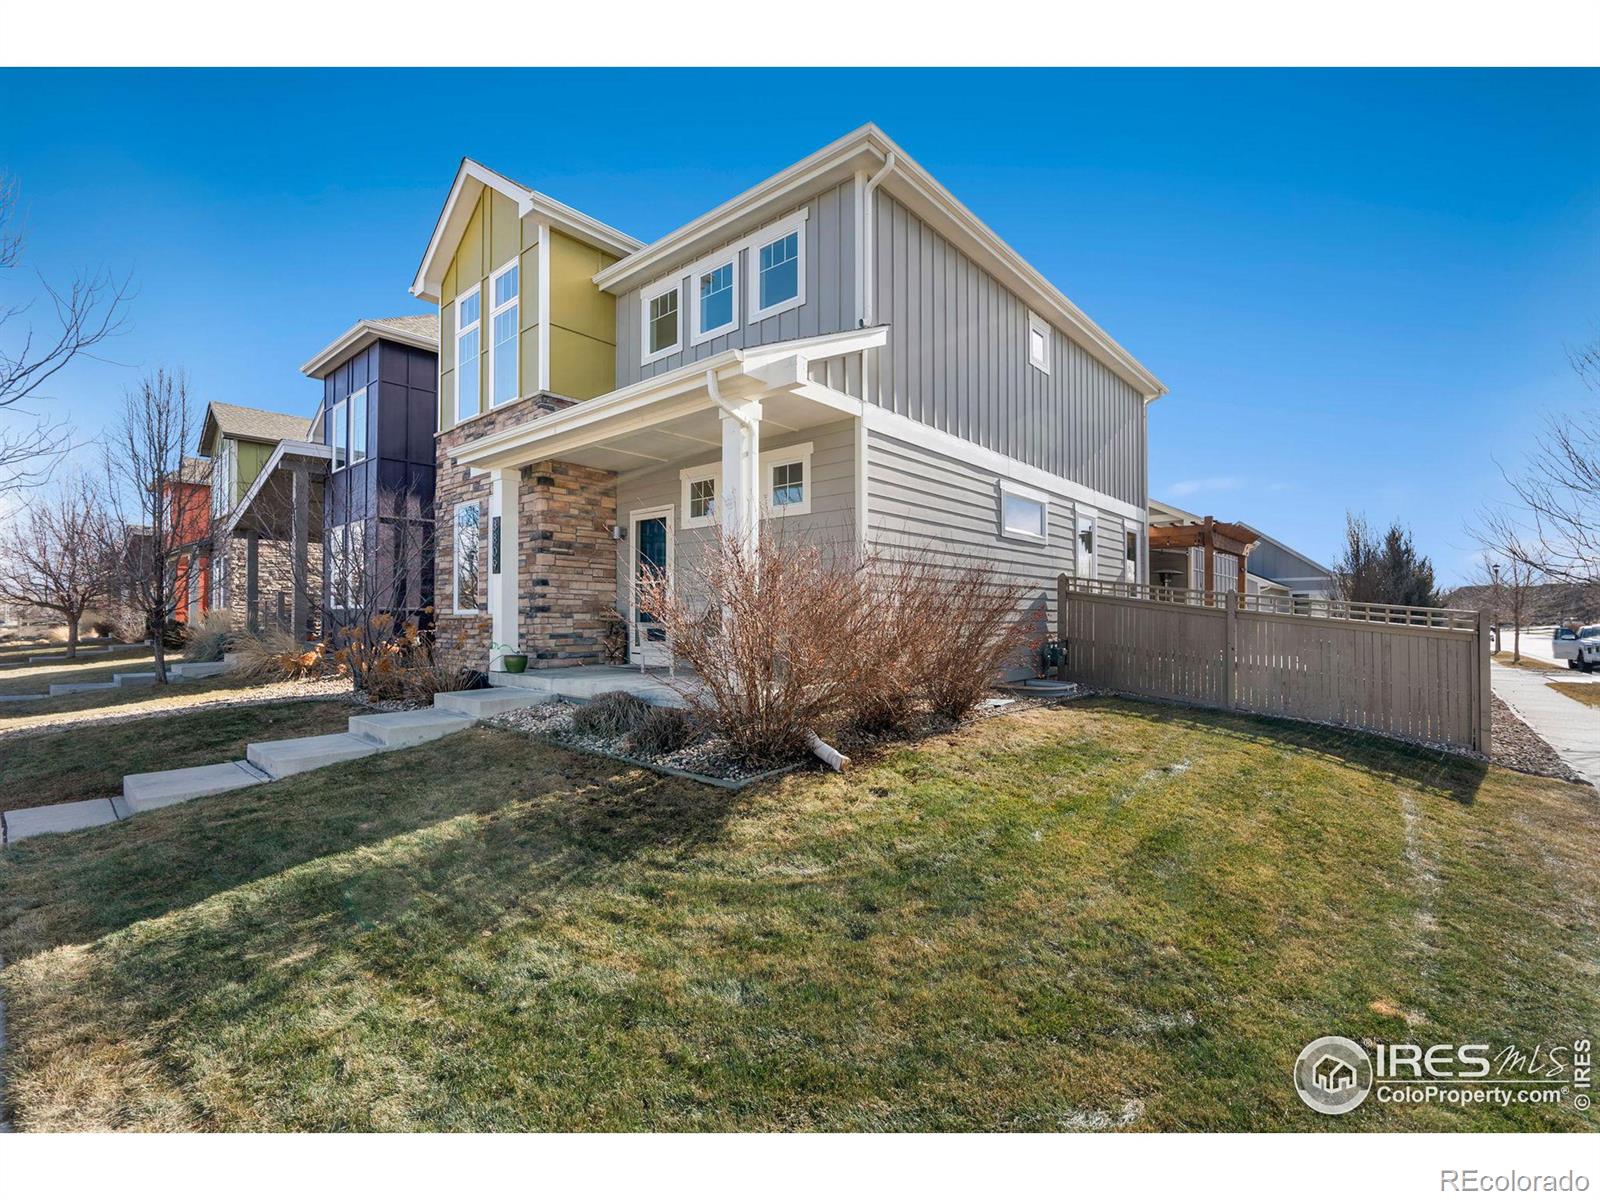 3809  wild elm way, Fort Collins sold home. Closed on 2024-02-16 for $722,000.